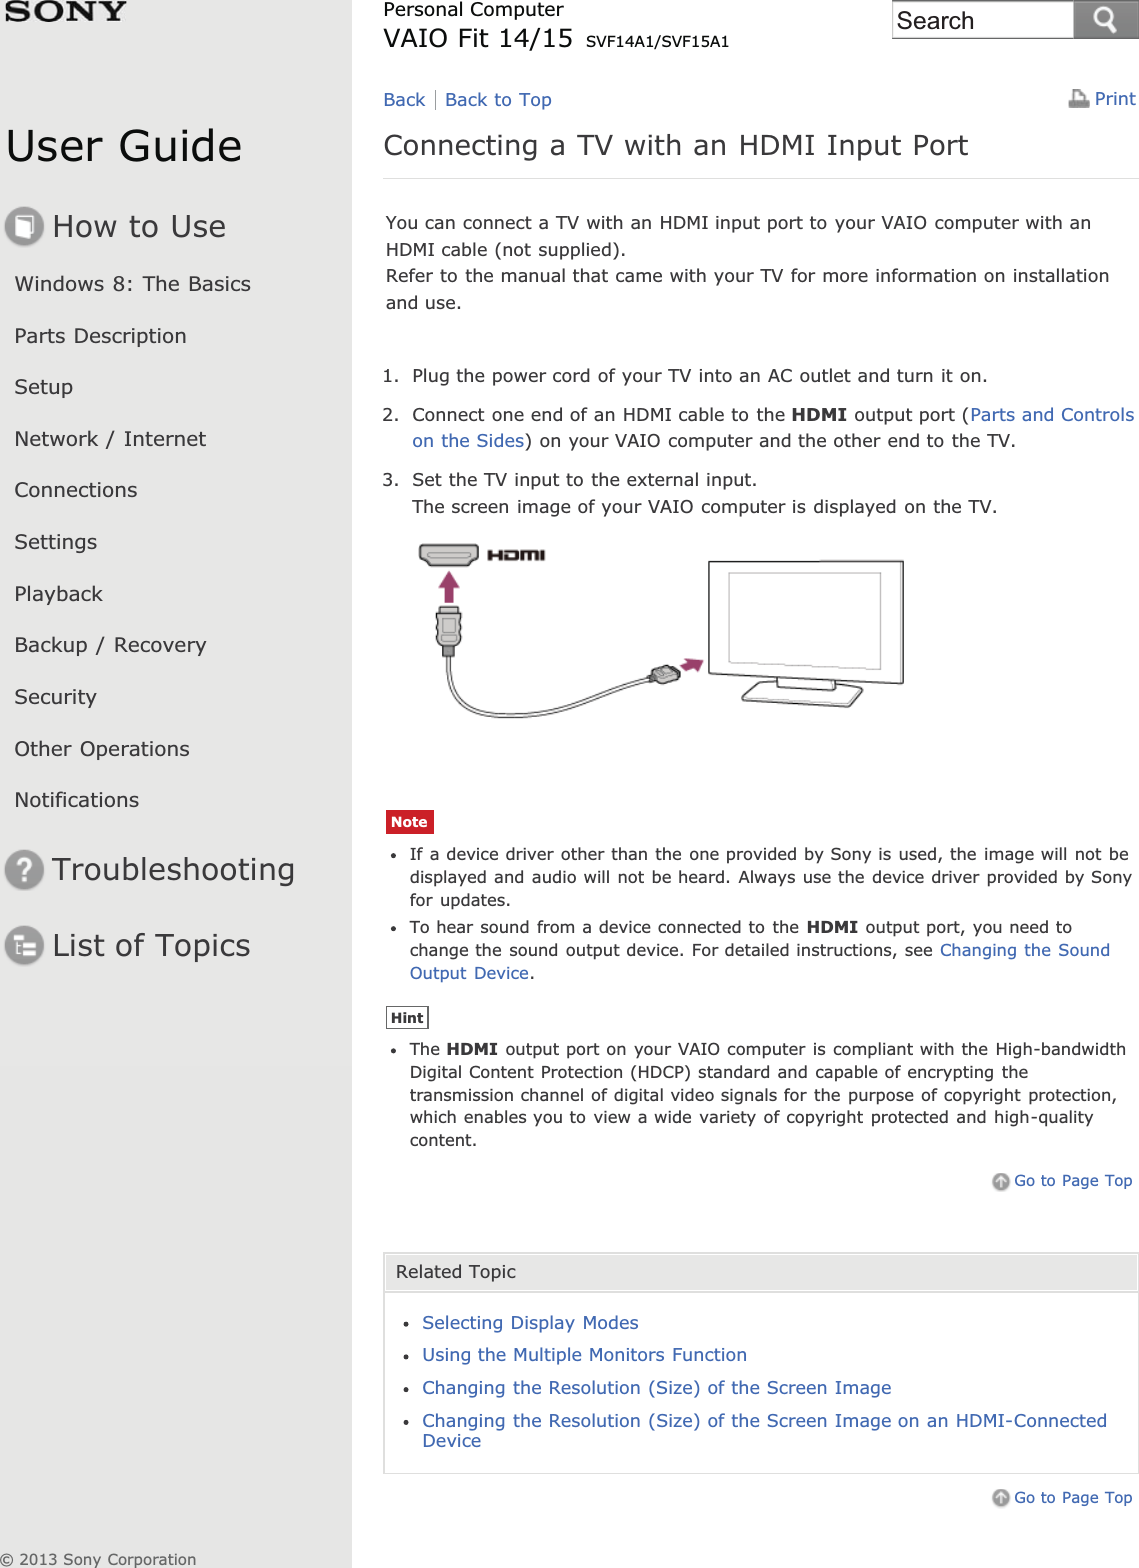 User GuideHow to UseWindows 8: The BasicsParts DescriptionSetupNetwork / InternetConnectionsSettingsPlaybackBackup / RecoverySecurityOther OperationsNotificationsTroubleshootingList of TopicsPrintPersonal ComputerVAIO Fit 14/15 SVF14A1/SVF15A1Connecting a TV with an HDMI Input PortYou can connect a TV with an HDMI input port to your VAIO computer with anHDMI cable (not supplied).Refer to the manual that came with your TV for more information on installationand use.1. Plug the power cord of your TV into an AC outlet and turn it on.2. Connect one end of an HDMI cable to the HDMI output port (Parts and Controlson the Sides) on your VAIO computer and the other end to the TV.3. Set the TV input to the external input.The screen image of your VAIO computer is displayed on the TV.NoteIf a device driver other than the one provided by Sony is used, the image will not bedisplayed and audio will not be heard. Always use the device driver provided by Sonyfor updates.To hear sound from a device connected to the HDMI output port, you need tochange the sound output device. For detailed instructions, see Changing the SoundOutput Device.HintThe HDMI output port on your VAIO computer is compliant with the High-bandwidthDigital Content Protection (HDCP) standard and capable of encrypting thetransmission channel of digital video signals for the purpose of copyright protection,which enables you to view a wide variety of copyright protected and high-qualitycontent.Go to Page TopRelated TopicSelecting Display ModesUsing the Multiple Monitors FunctionChanging the Resolution (Size) of the Screen ImageChanging the Resolution (Size) of the Screen Image on an HDMI-ConnectedDeviceGo to Page TopBack Back to Top© 2013 Sony CorporationSearch